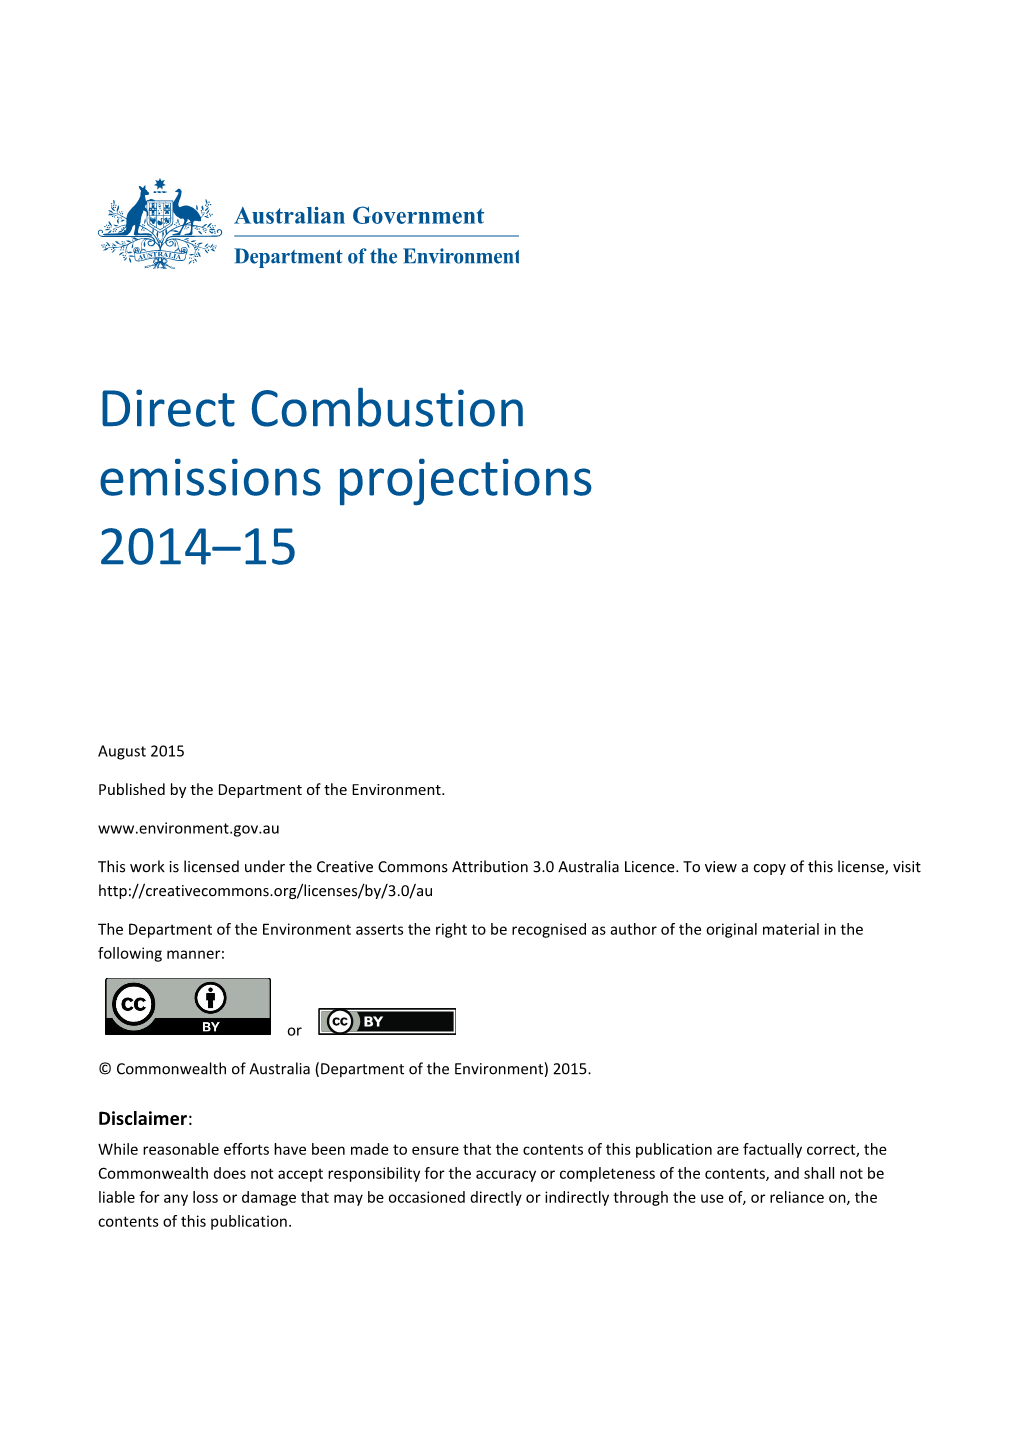 Direct Combustion Emissions Projections 2014 15